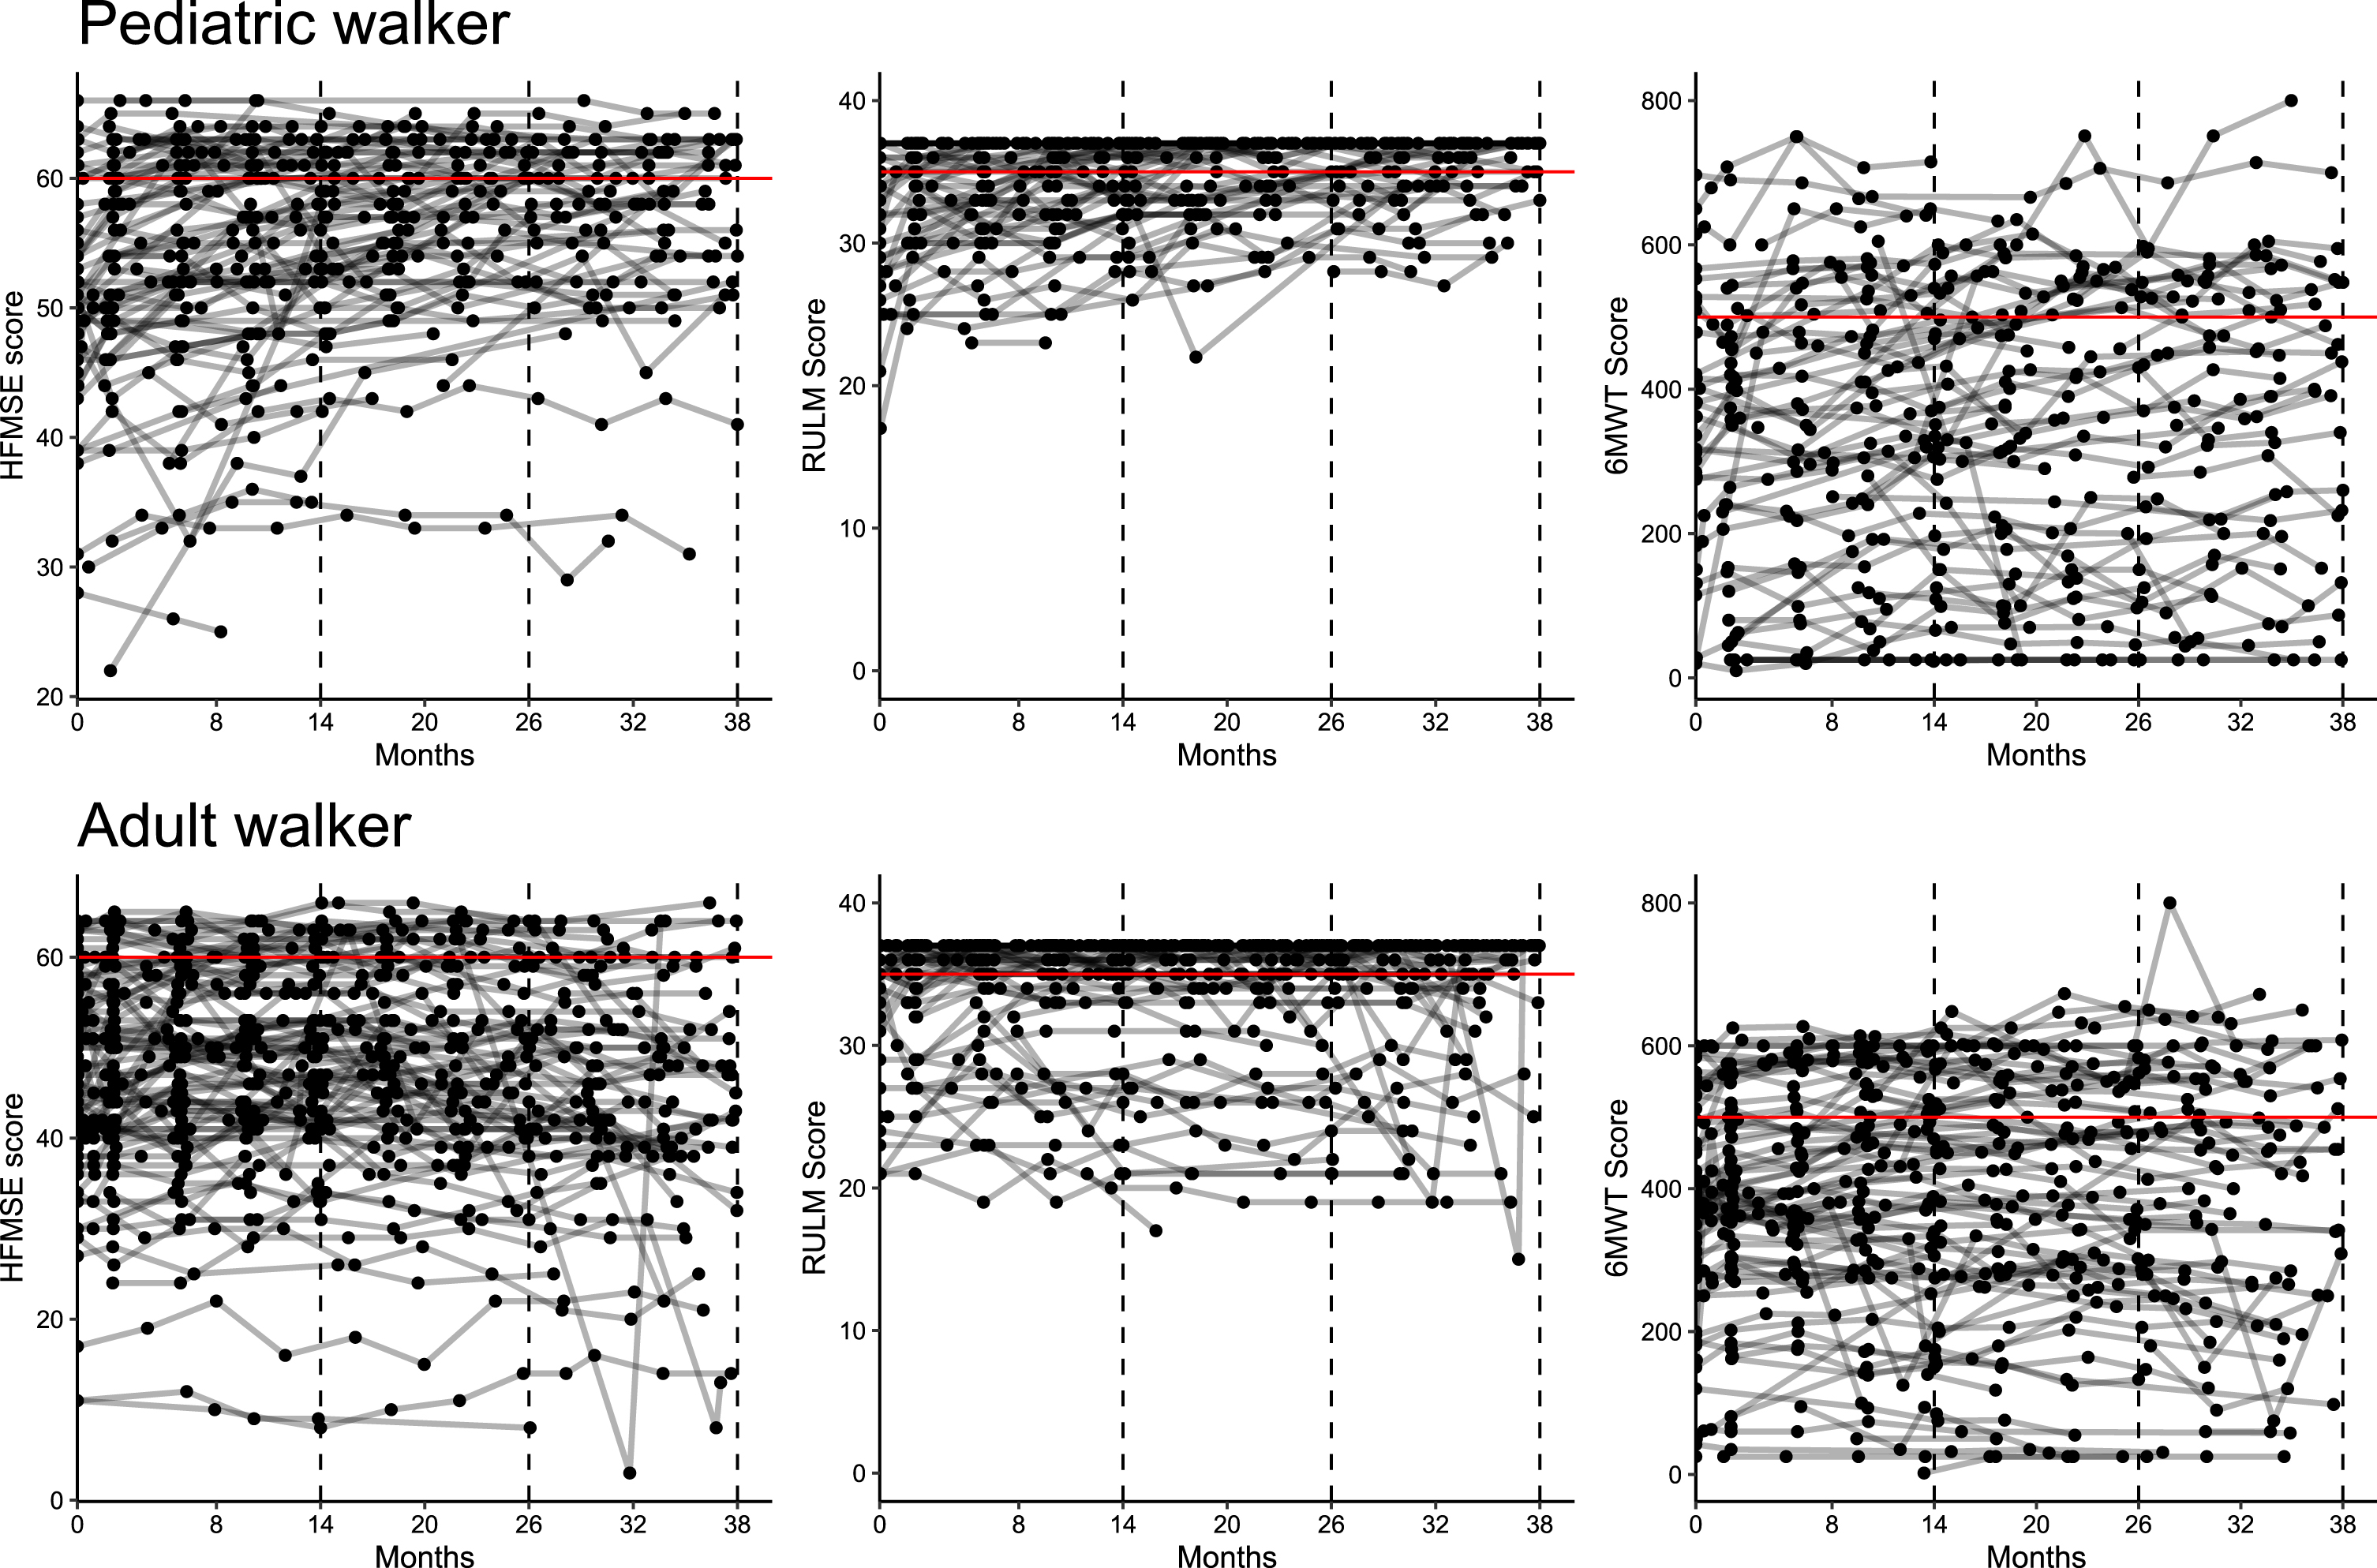 Ceiling effect of outcome measures. Longitudinal progression for HFMSE, RULM and 6WMT in pediatric (A) and adult walkers (B). Lines represent individual patients. Red horizontal lines reflect a ceiling effect with≥60 points in HFMSE,≥35 points in RULM and≥500 m in 6MWT.